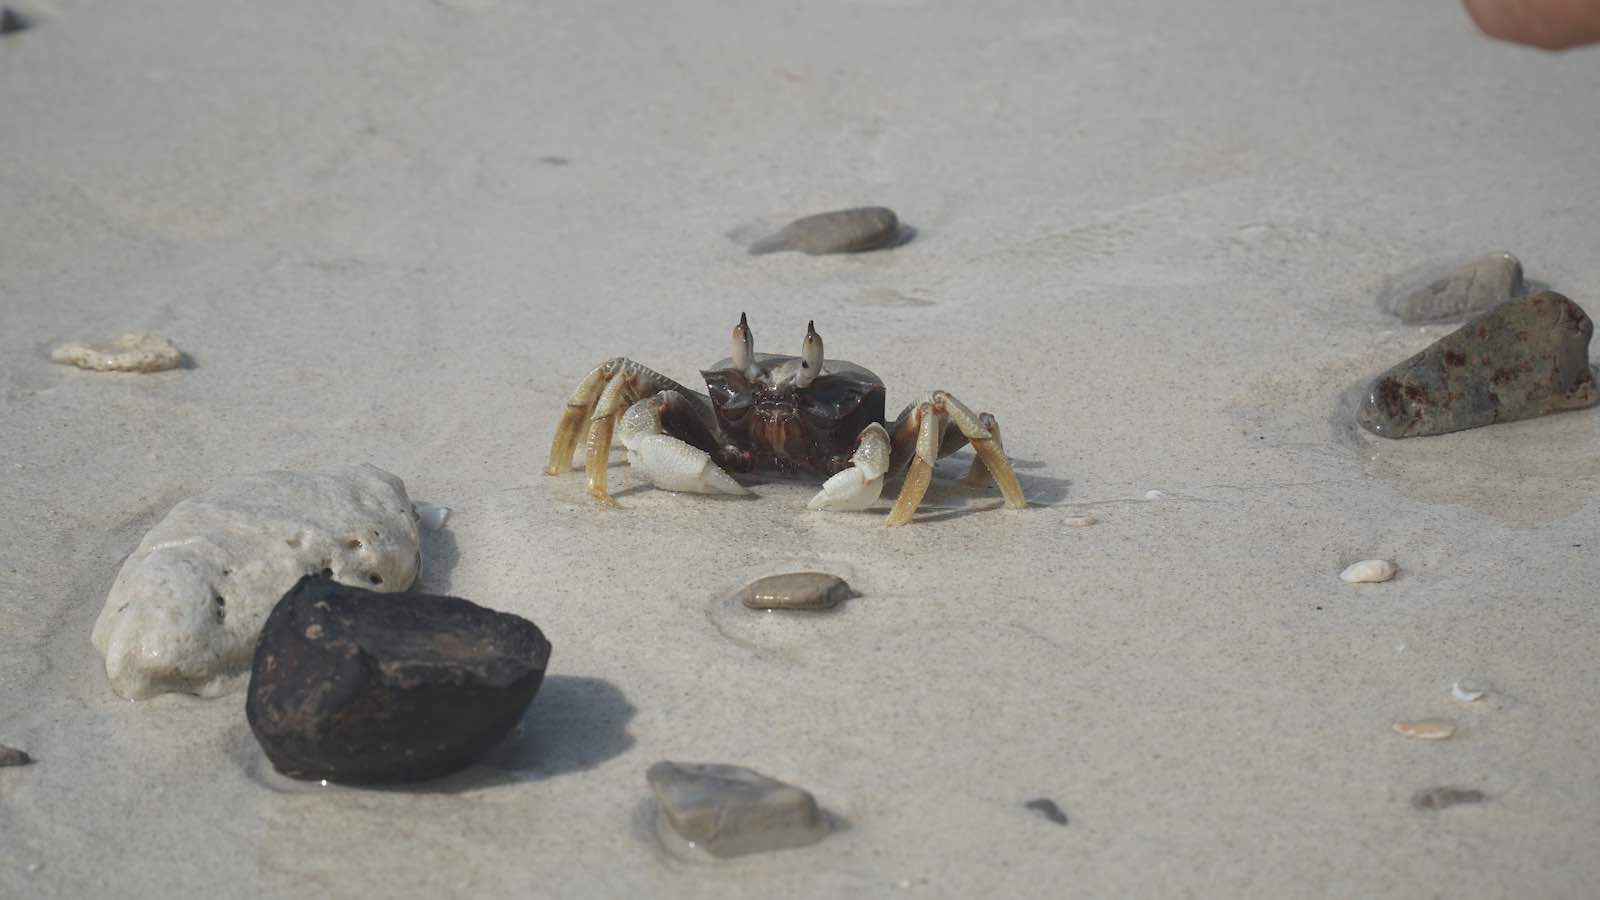 Found some cute crabs too. In the end getting stuck on this island actually turned out to be one of my favorite and most memorable days in Thailand.